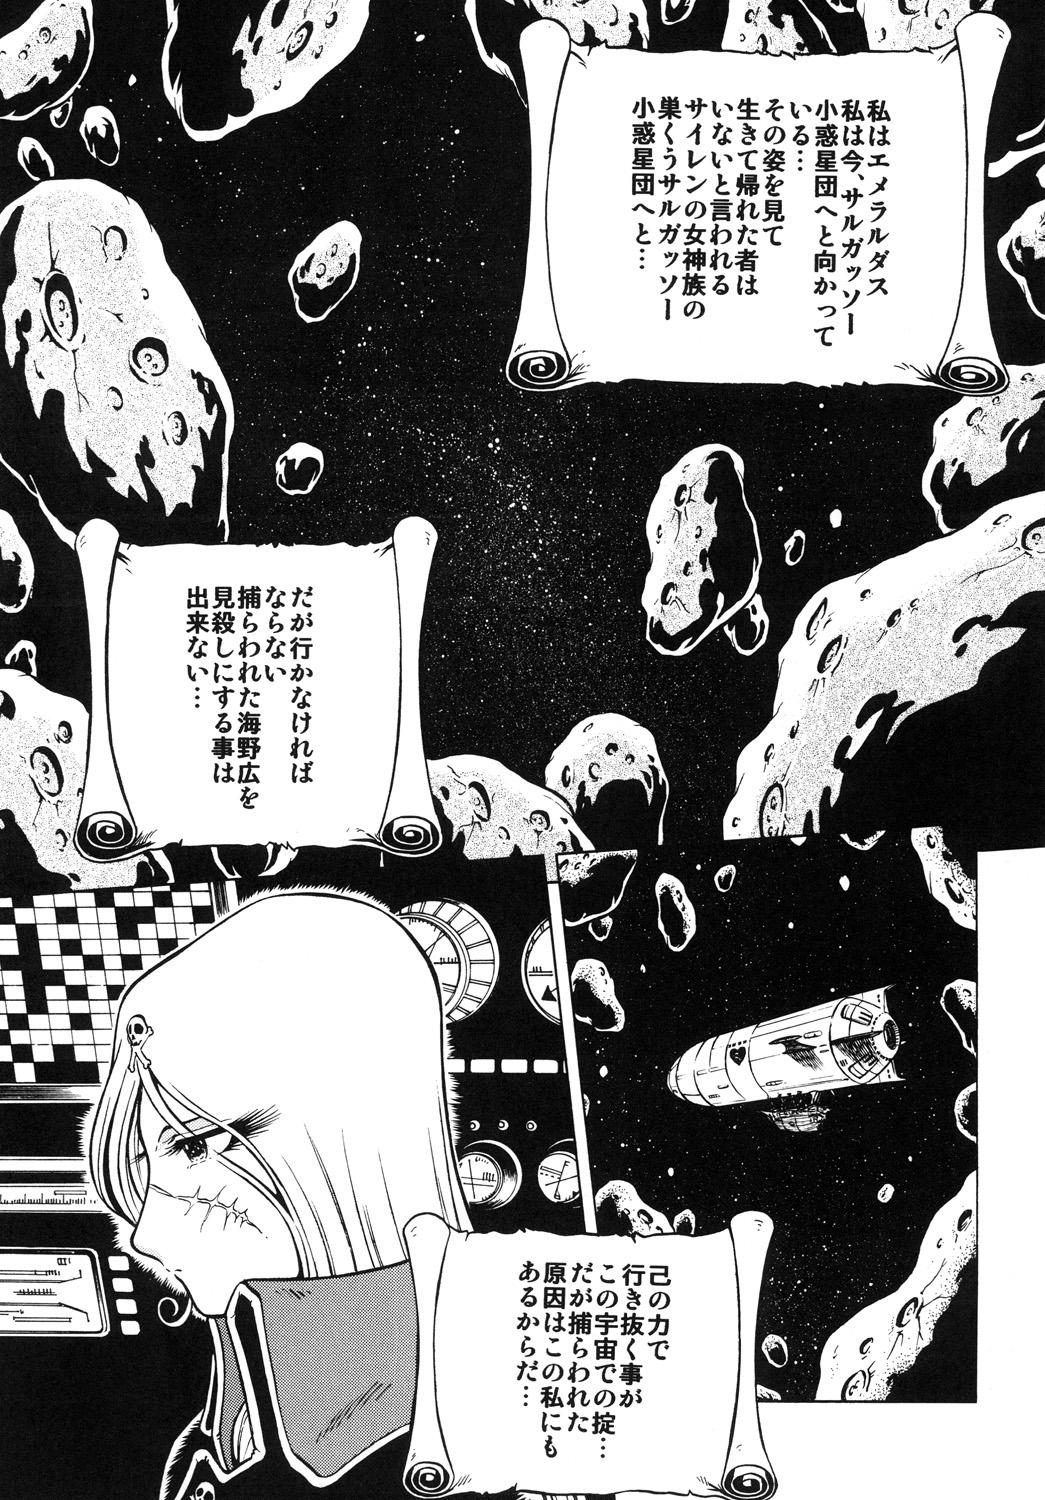 French NightHead+2 - Space pirate captain harlock Bizarre - Page 4